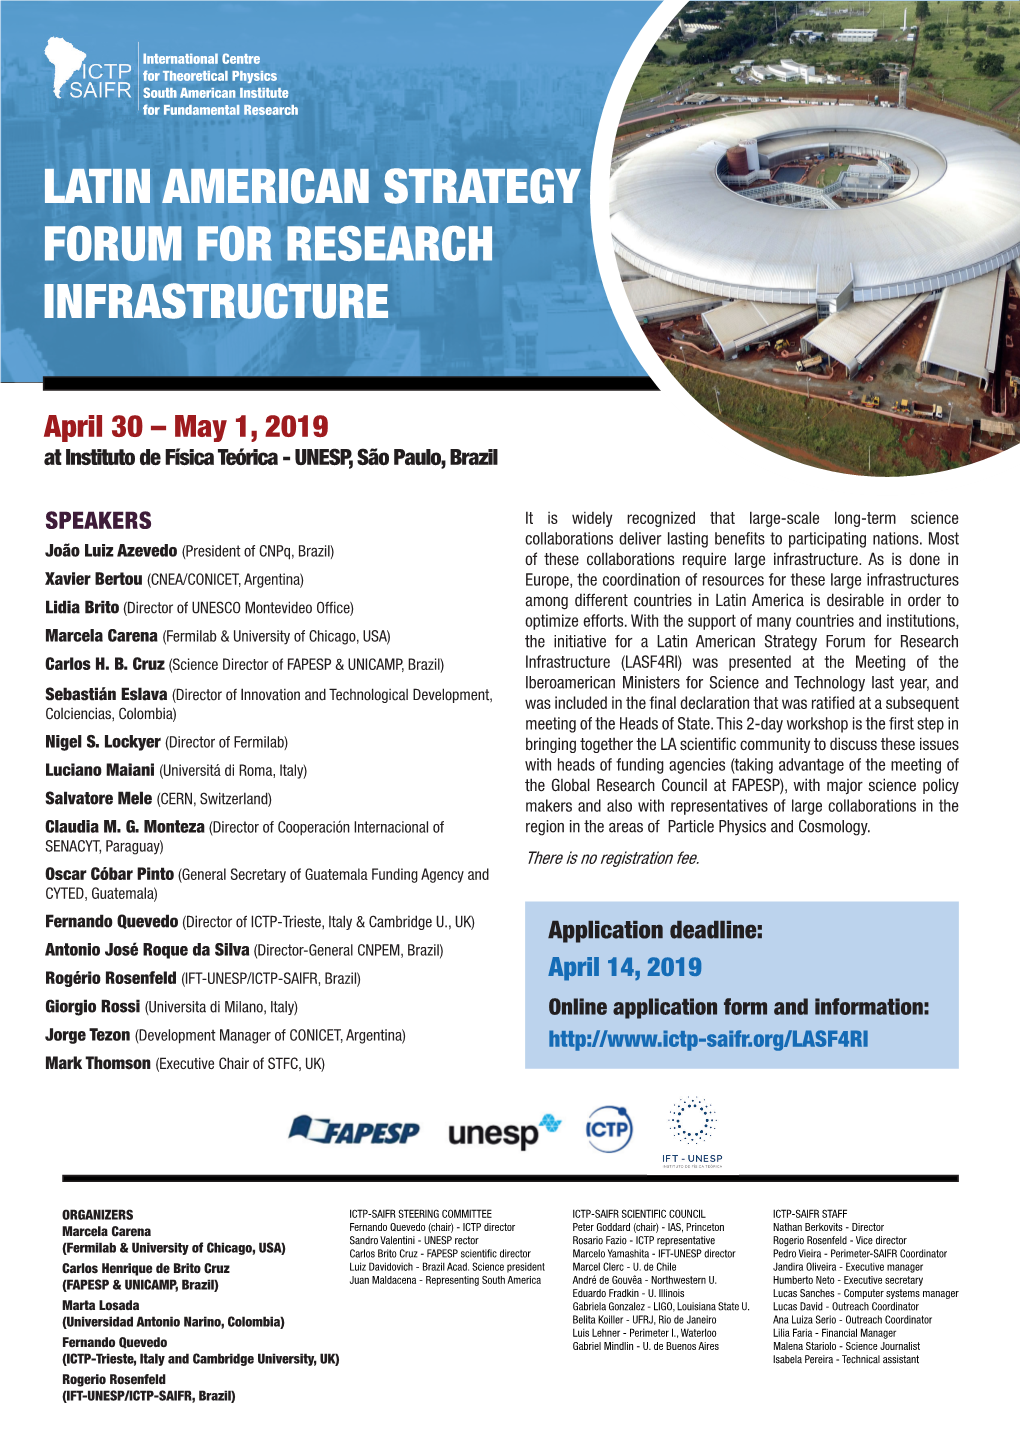 Latin American Strategy Forum for Research Infrastructure